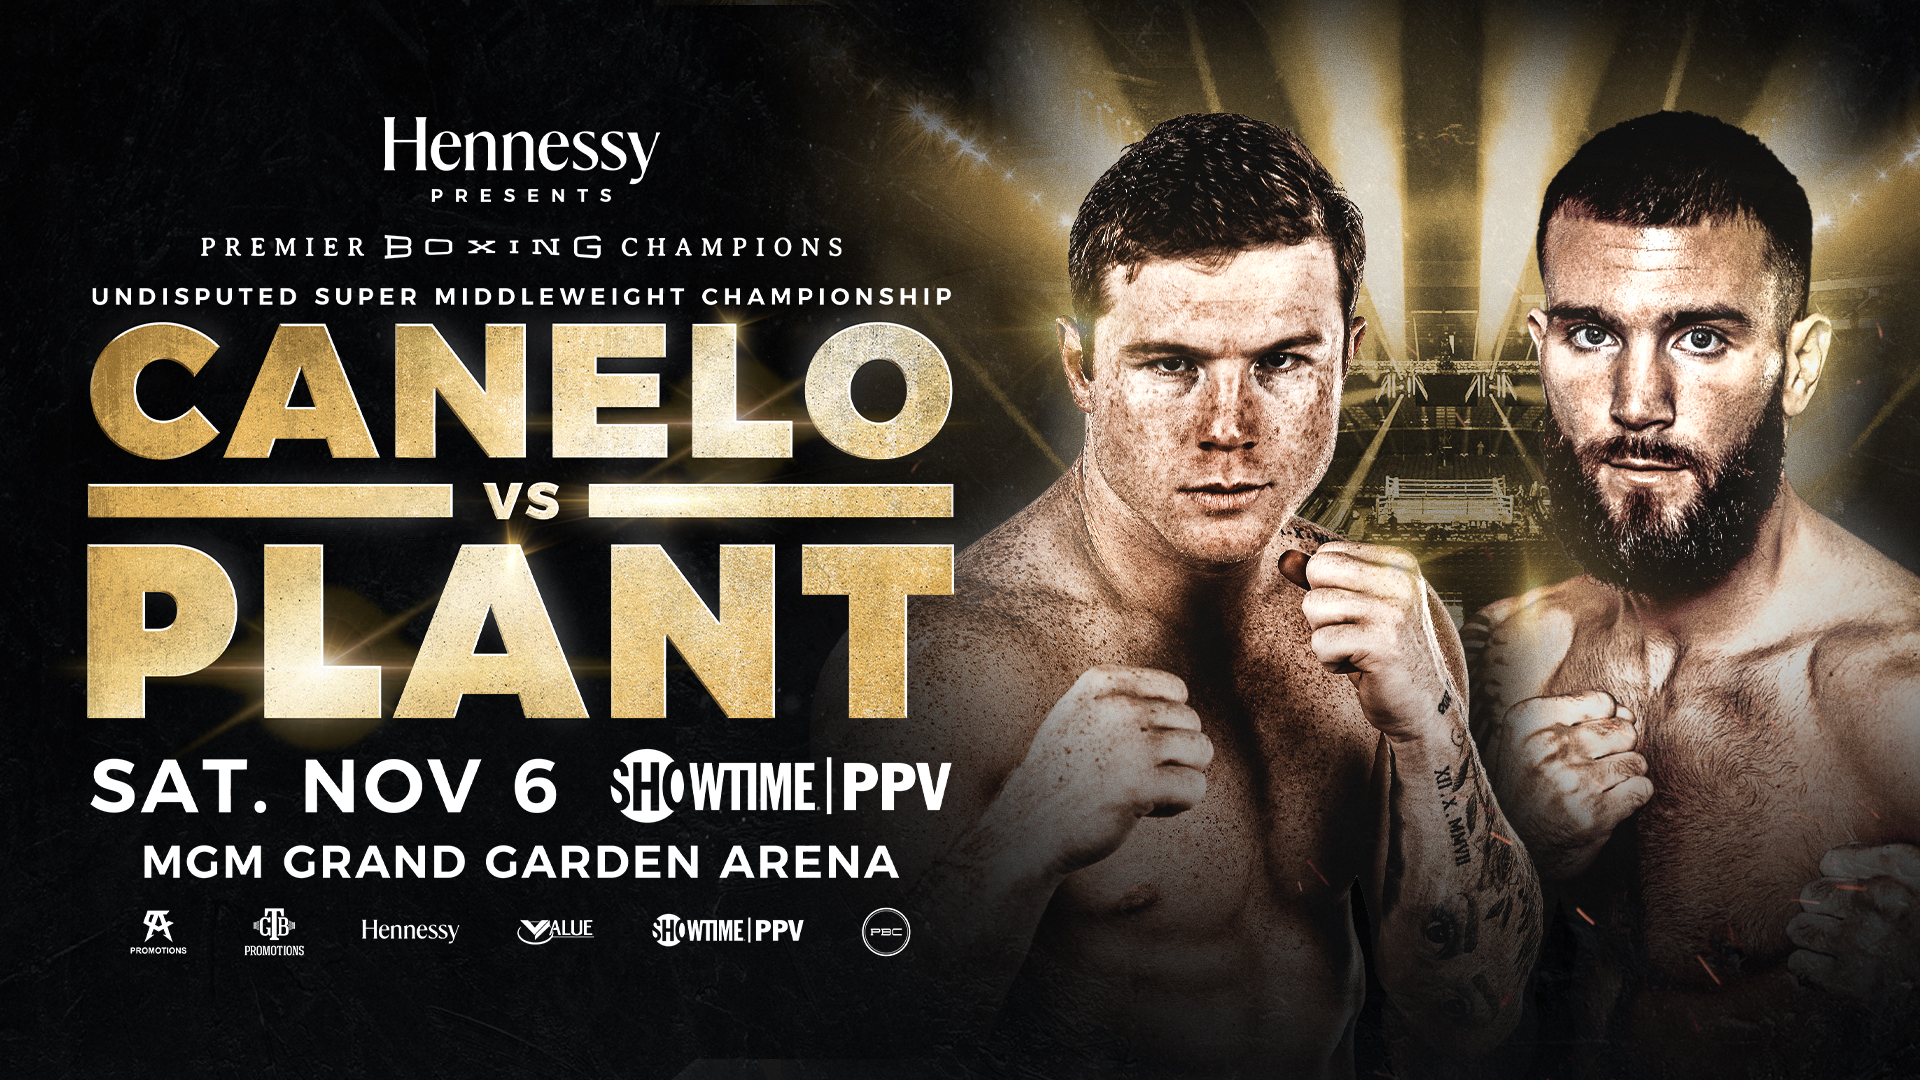 Troende pille Antagonisme Premier Boxing Champions on Twitter: "Four-Division World Champ and unified  WBC/WBO/WBA Super Middleweight Champ @Canelo and undefeated IBF Super  Middleweight Champ @SweetHandsPlant will meet in a historic showdown Sat.,  November 6 live